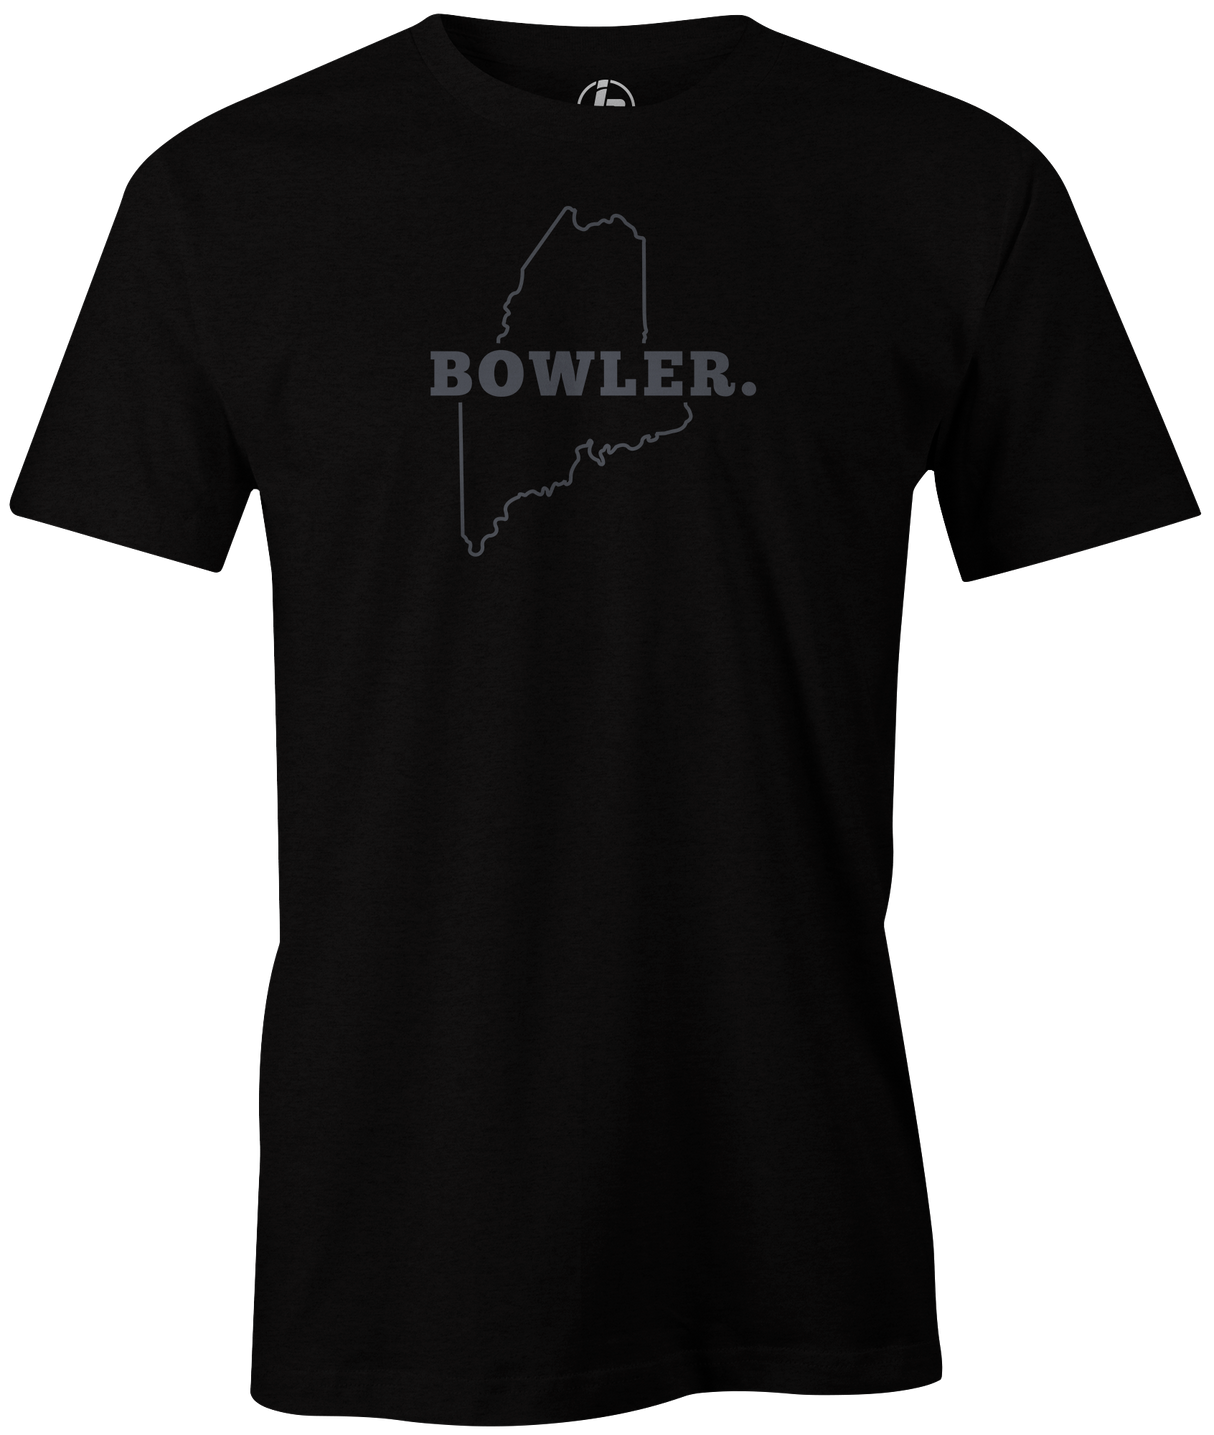 Maine State Men's Bowling T-shirt, Black, Cool, novelty, tshirt, tee, tee-shirt, tee shirt, teeshirt, team, comfortable